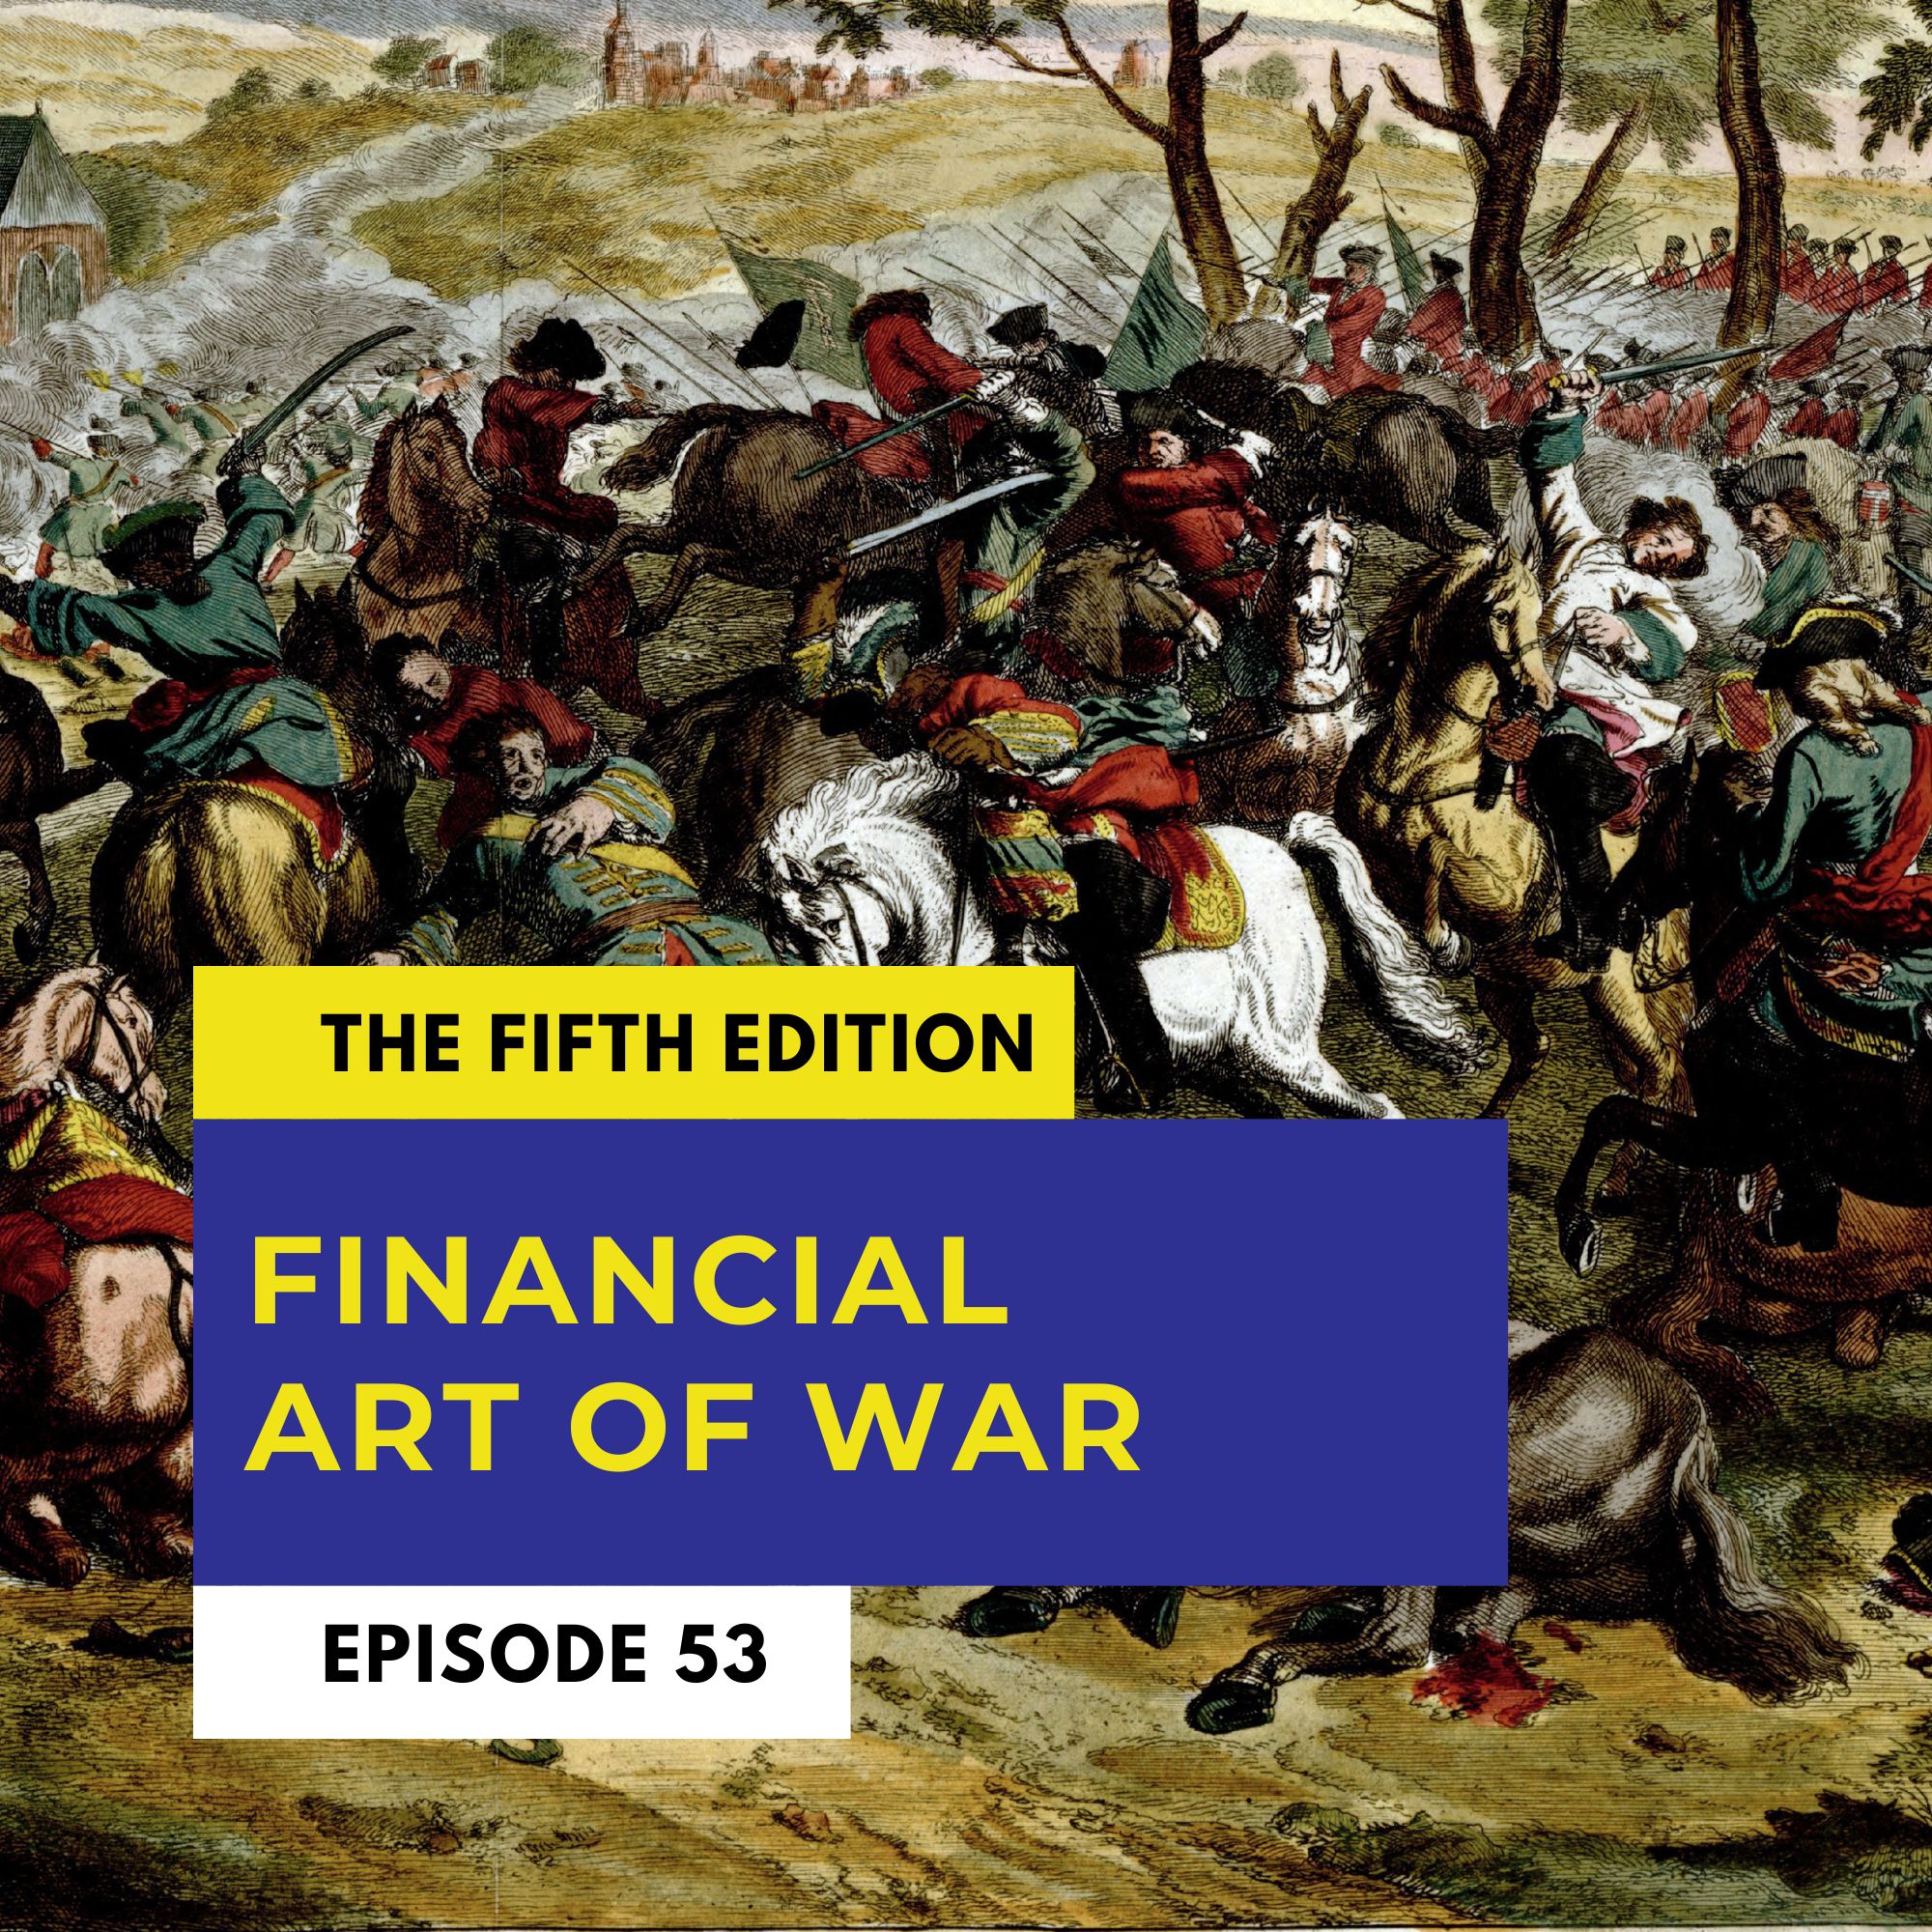 IBC and the Financial Art of War